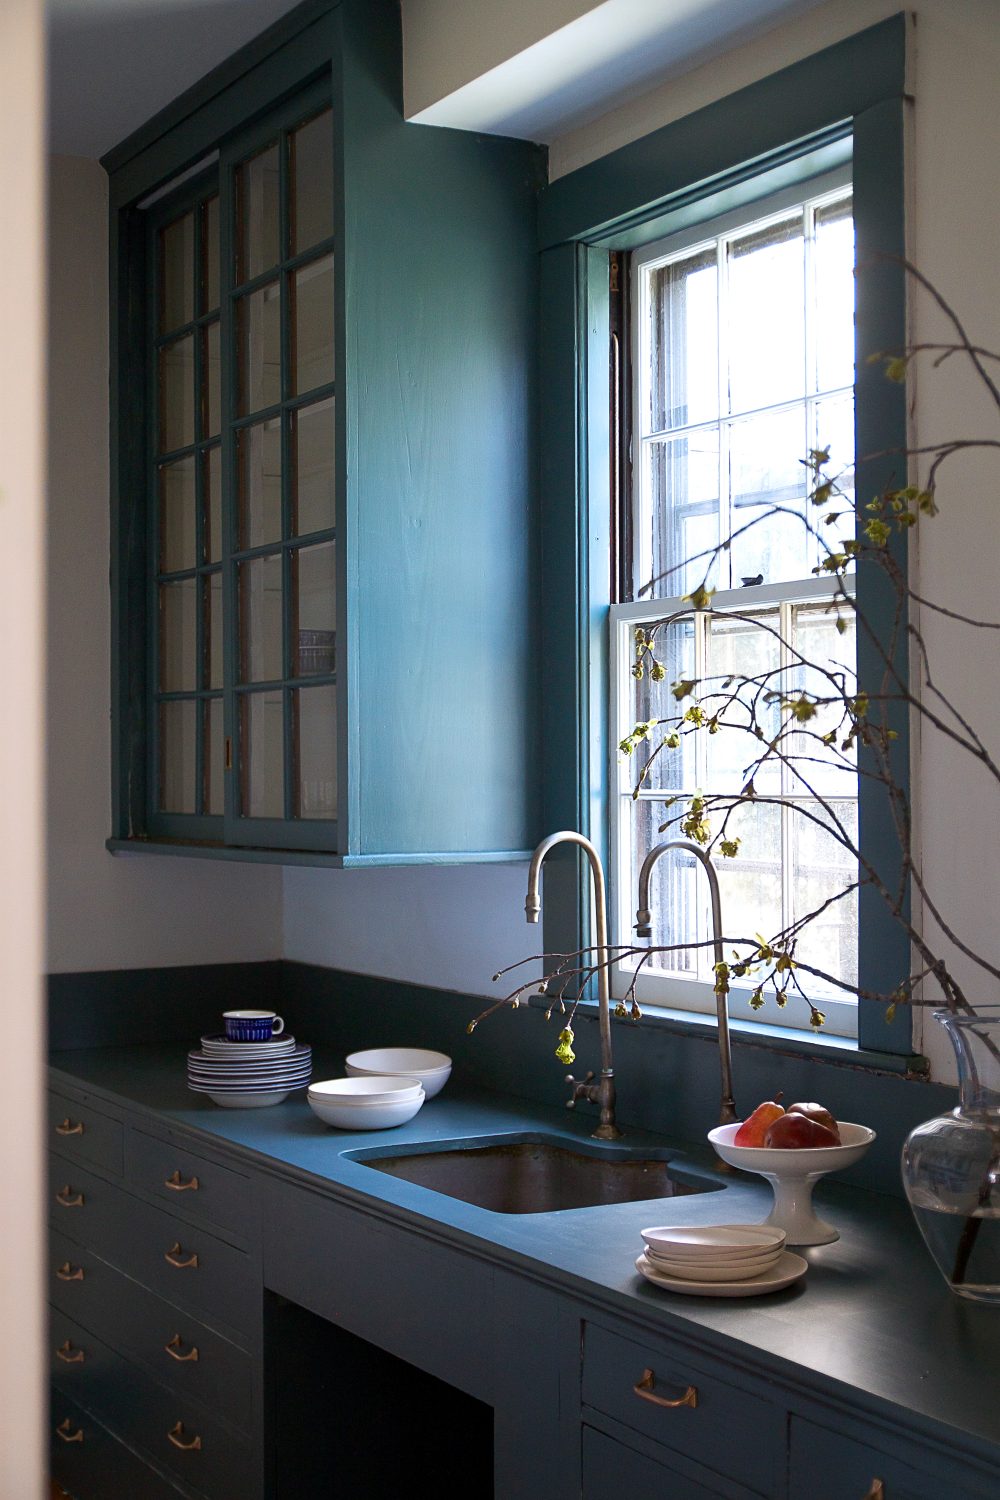  Justine Hand painted a butler's pantry, including counter, in Inchyra Blue. 